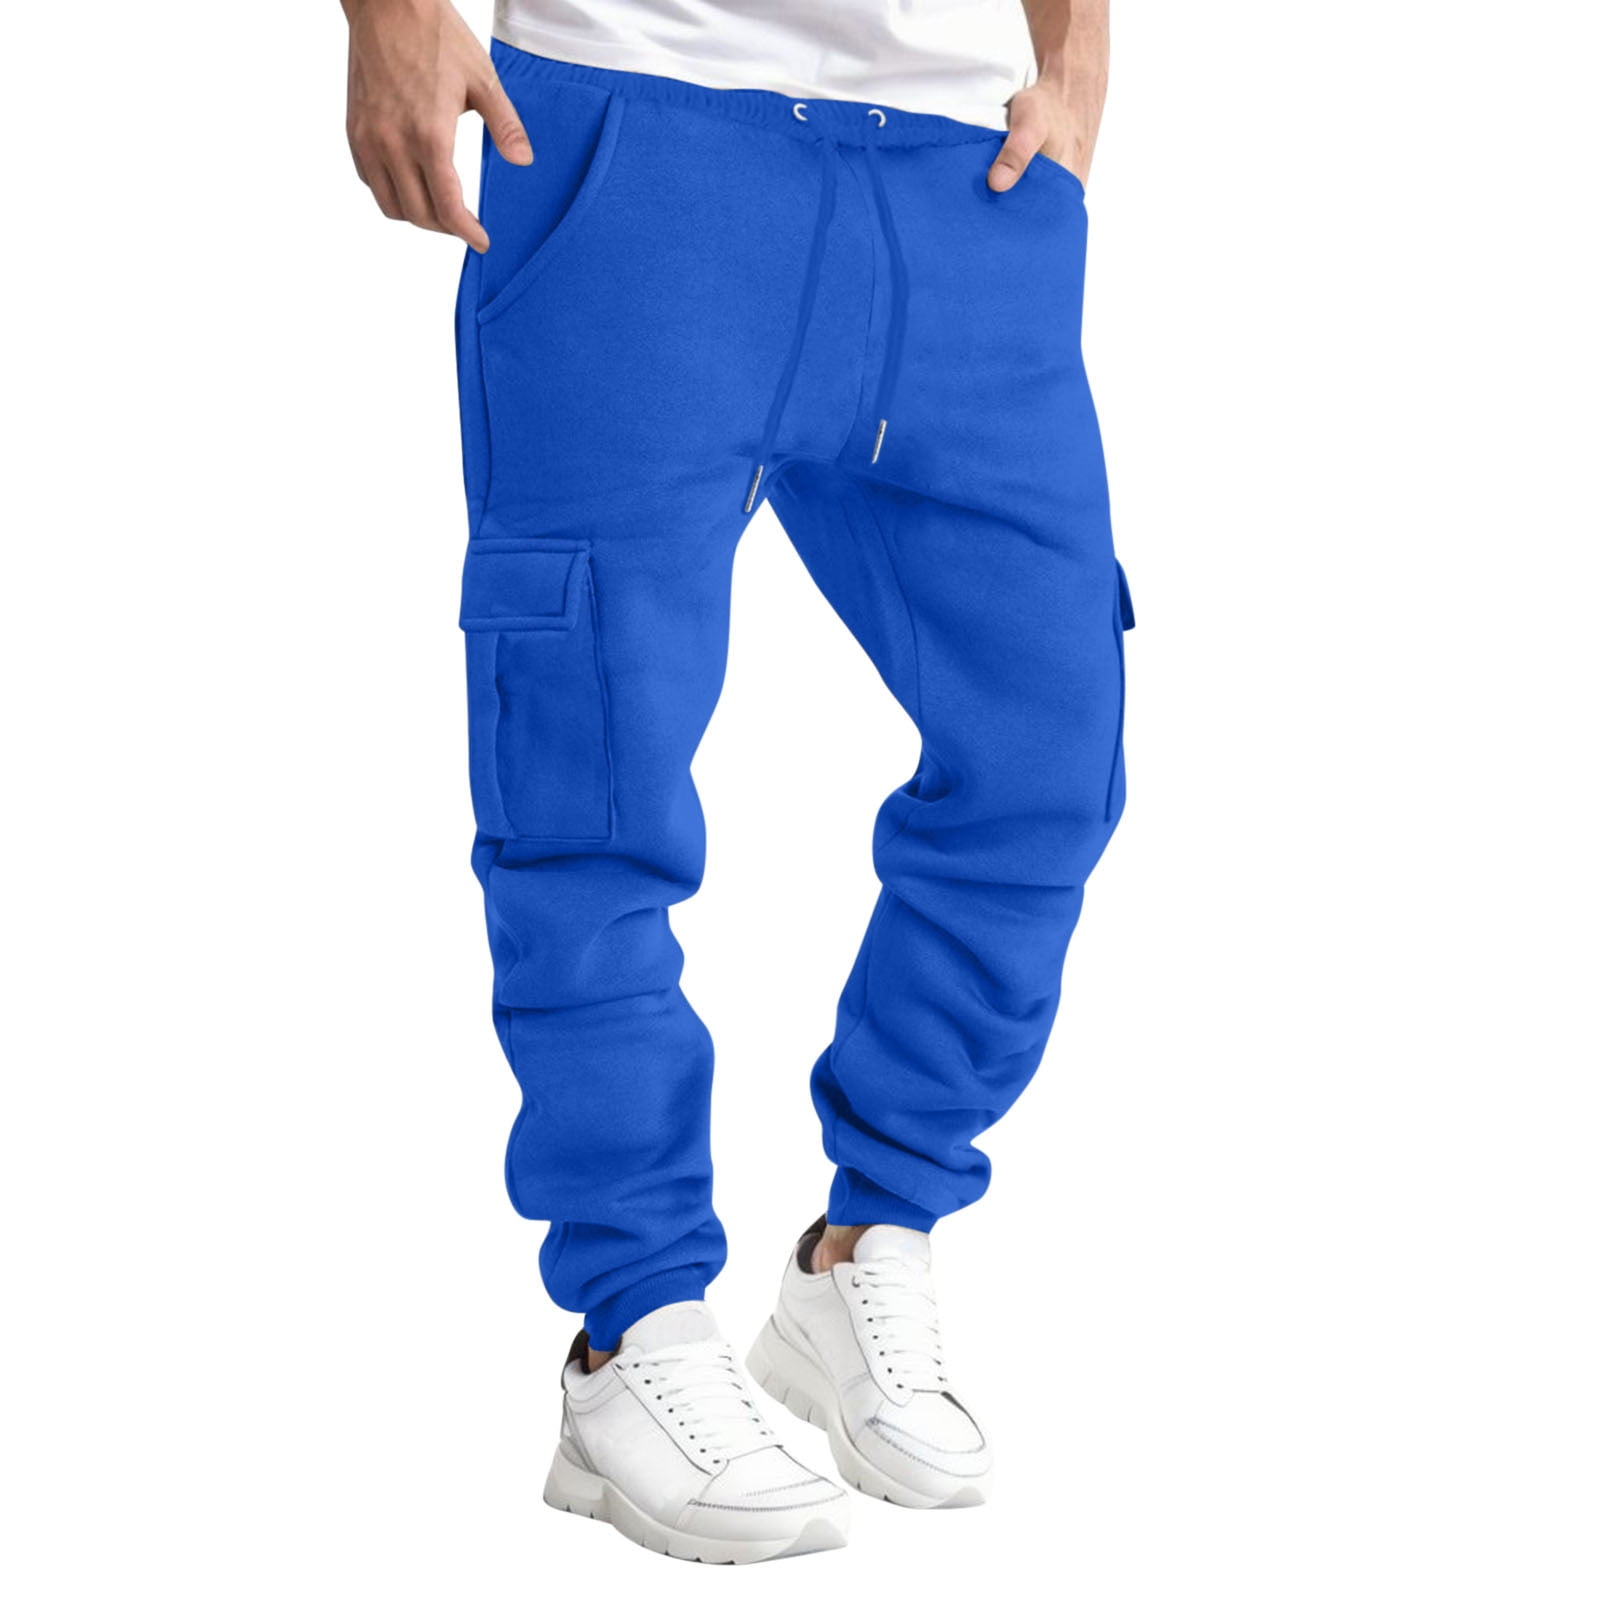 Clearance RYRJJ Cargo Pants for Men with Multi-Pocket Casual Outdoor  Trousers Wild Men's Work Pants Relaxed Fit Stretch(Blue,S)